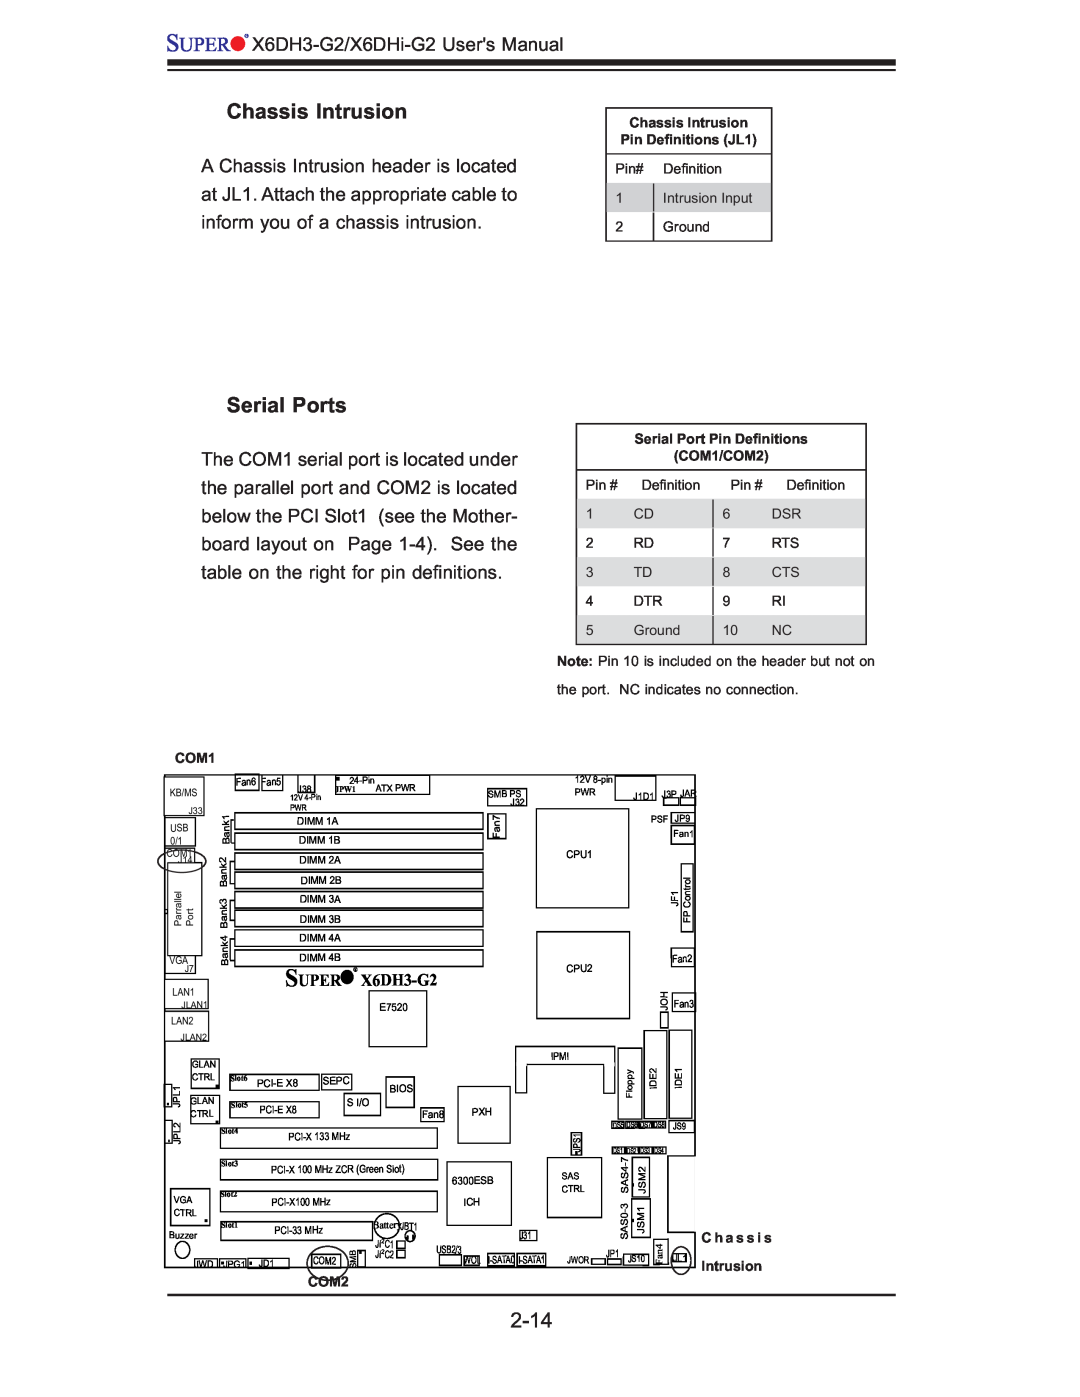 SUPER MICRO Computer X6DHi-G2 user manual Chassis Intrusion, Serial Ports, 2-14, Super, X6DH3-G2 